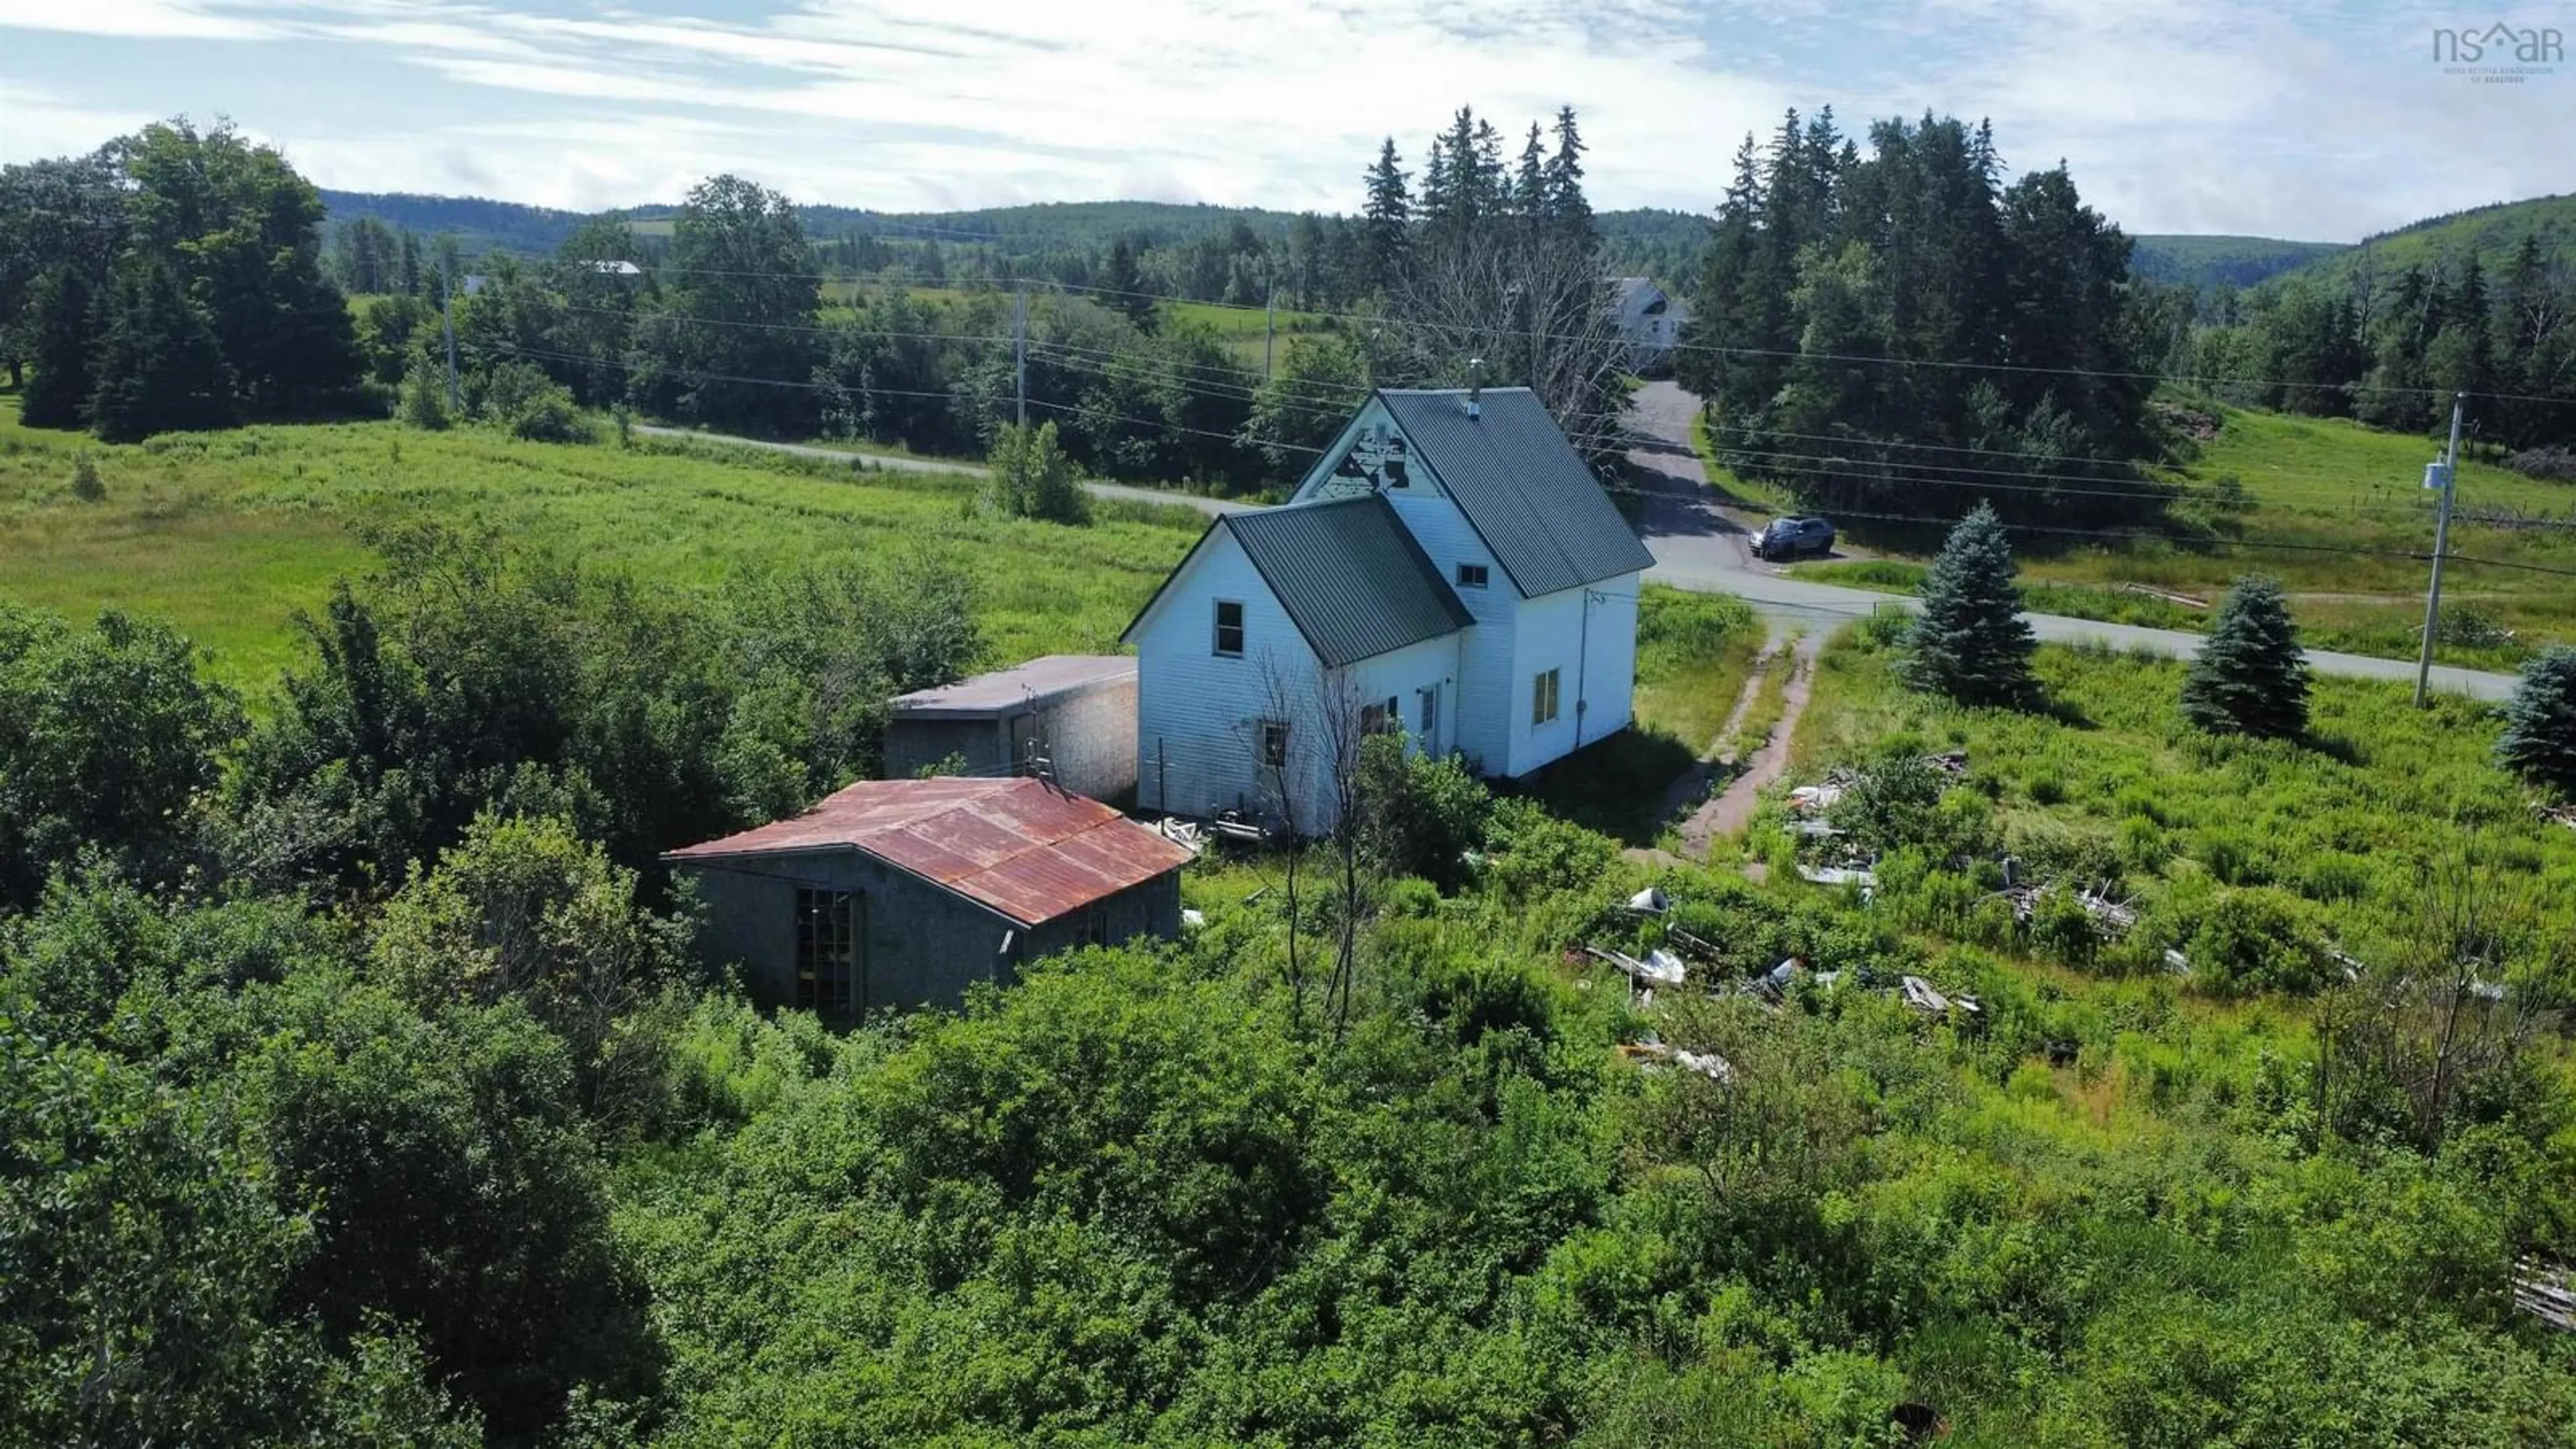 Cottage for 1181 Wentworth Collingwood Rd, Williamsdale Nova Scotia B0M 1E0